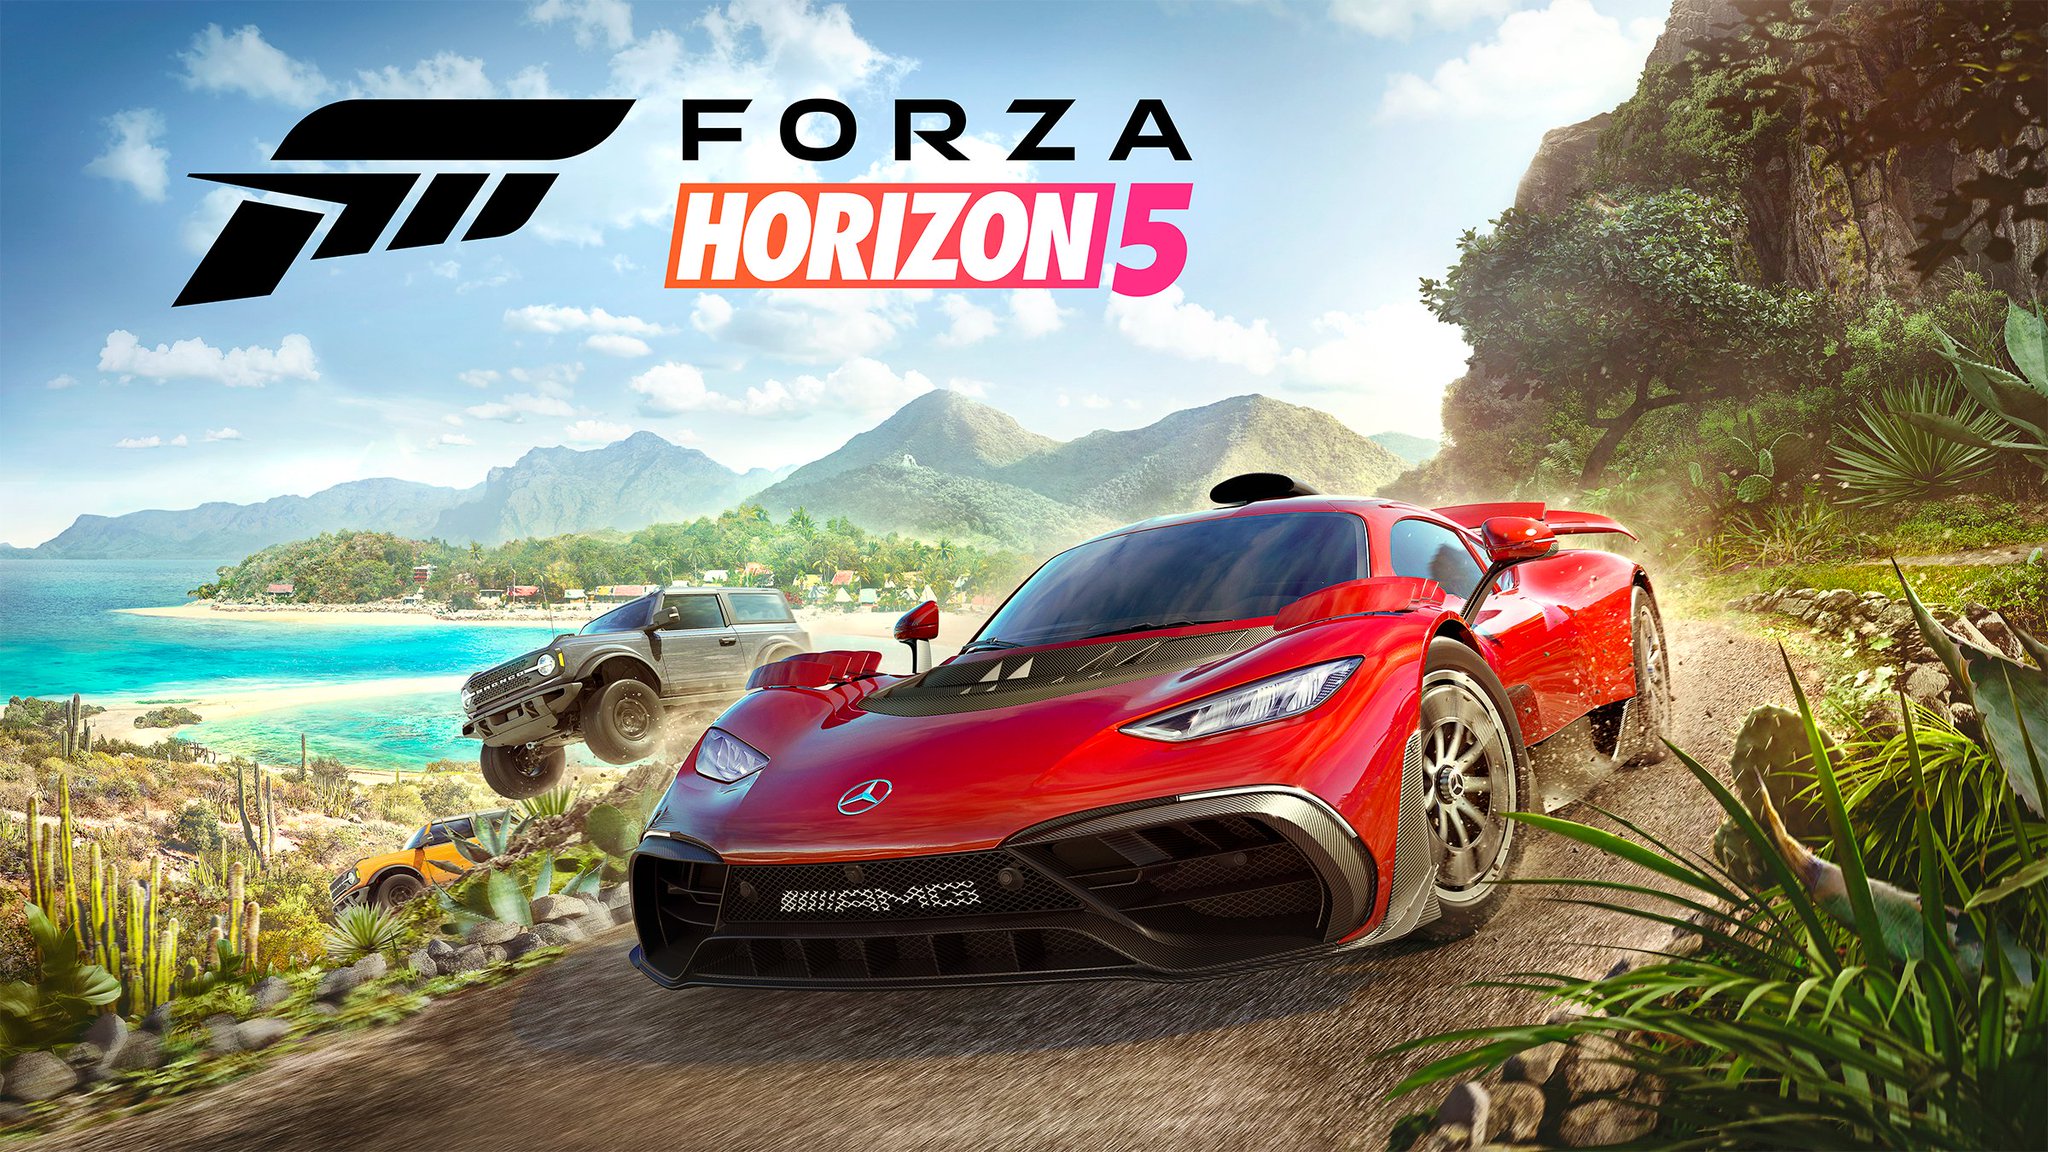 Forza Horizon 5 HD wallpaper featuring high-speed sports cars racing along a scenic coastal road with the game's logo prominently displayed.